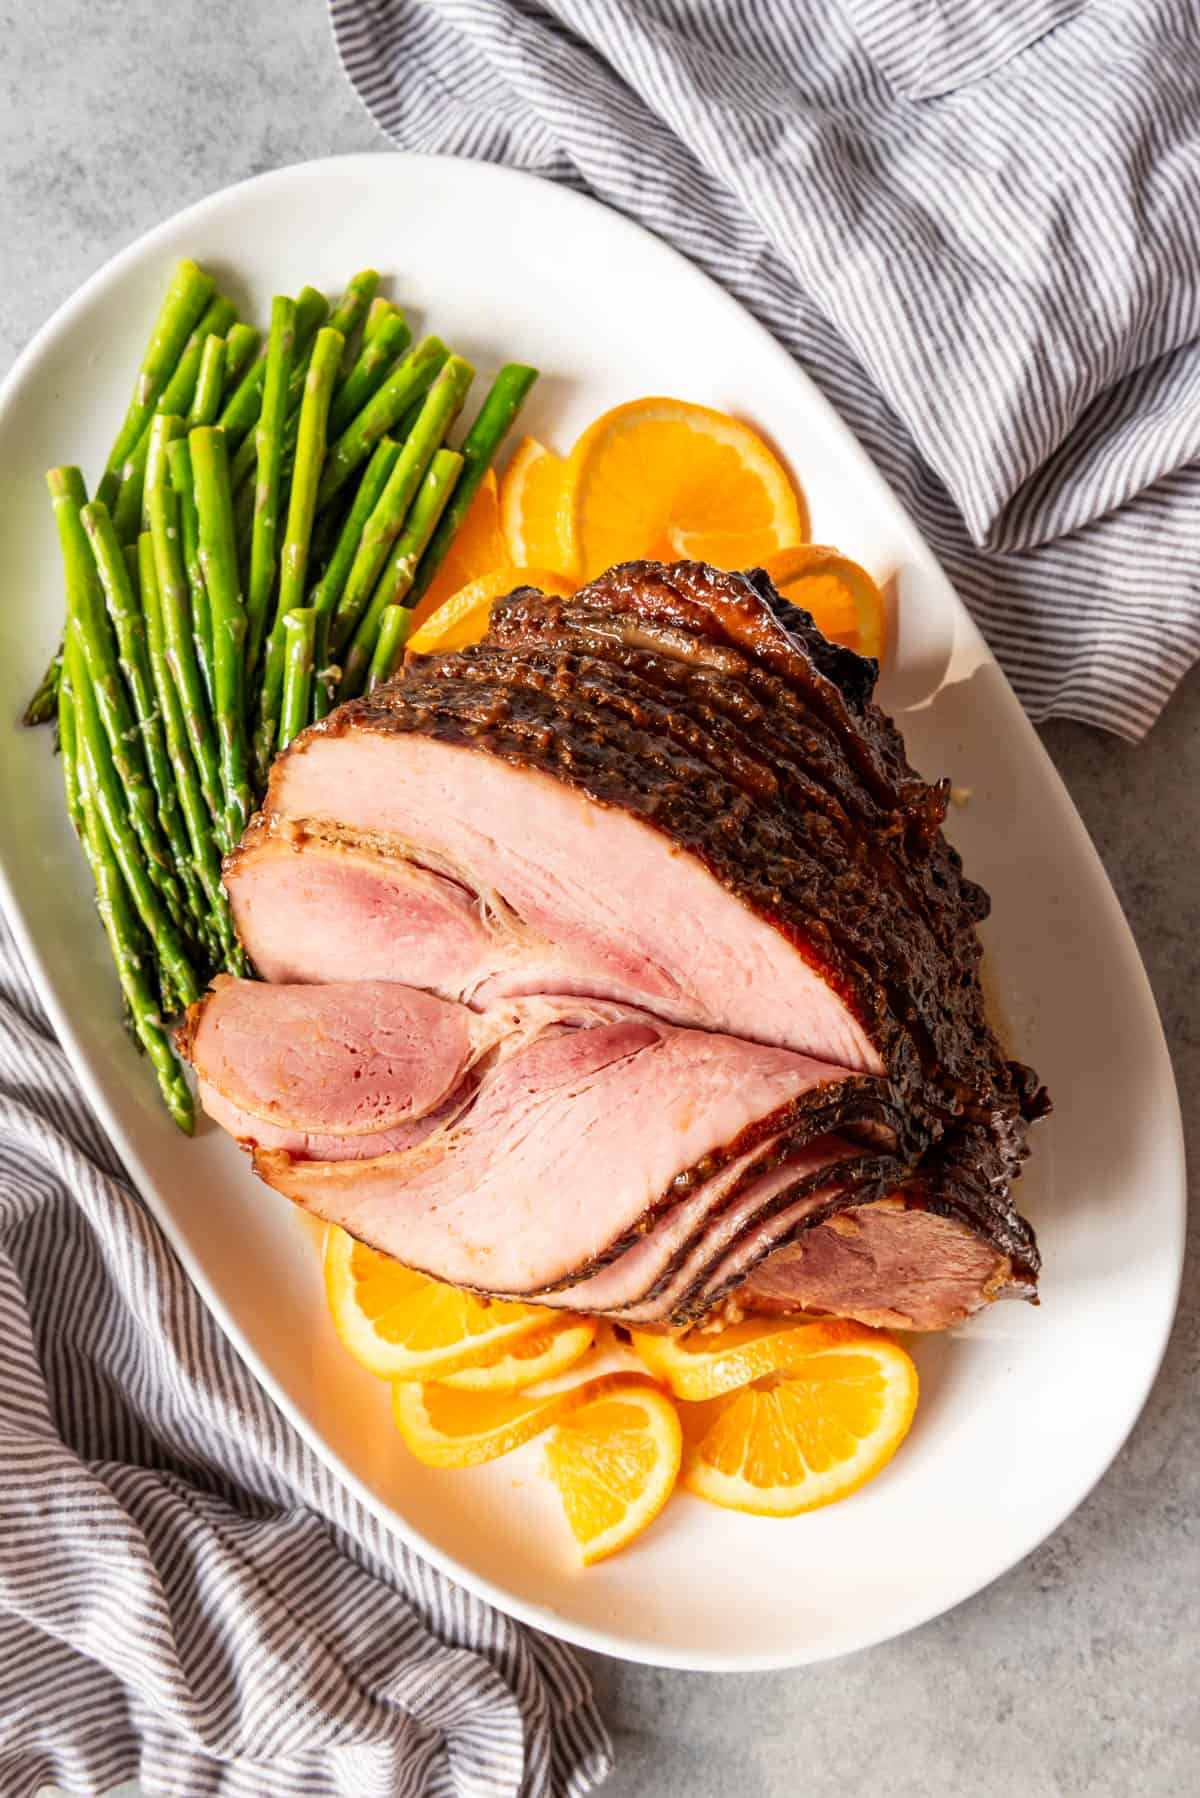 A spiral cut ham with sliced oranges and asparagus on a white platter.